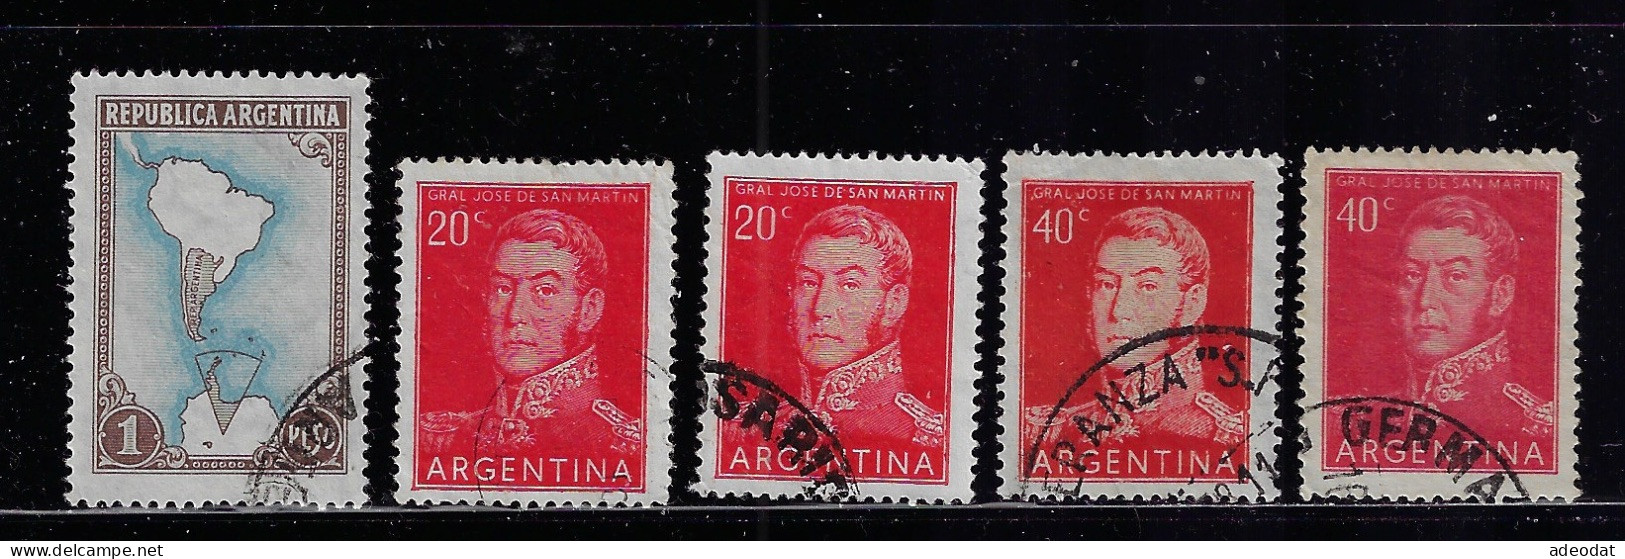 ARGENTINA  1951-54  SCOTT #594,628-631  USED - Used Stamps